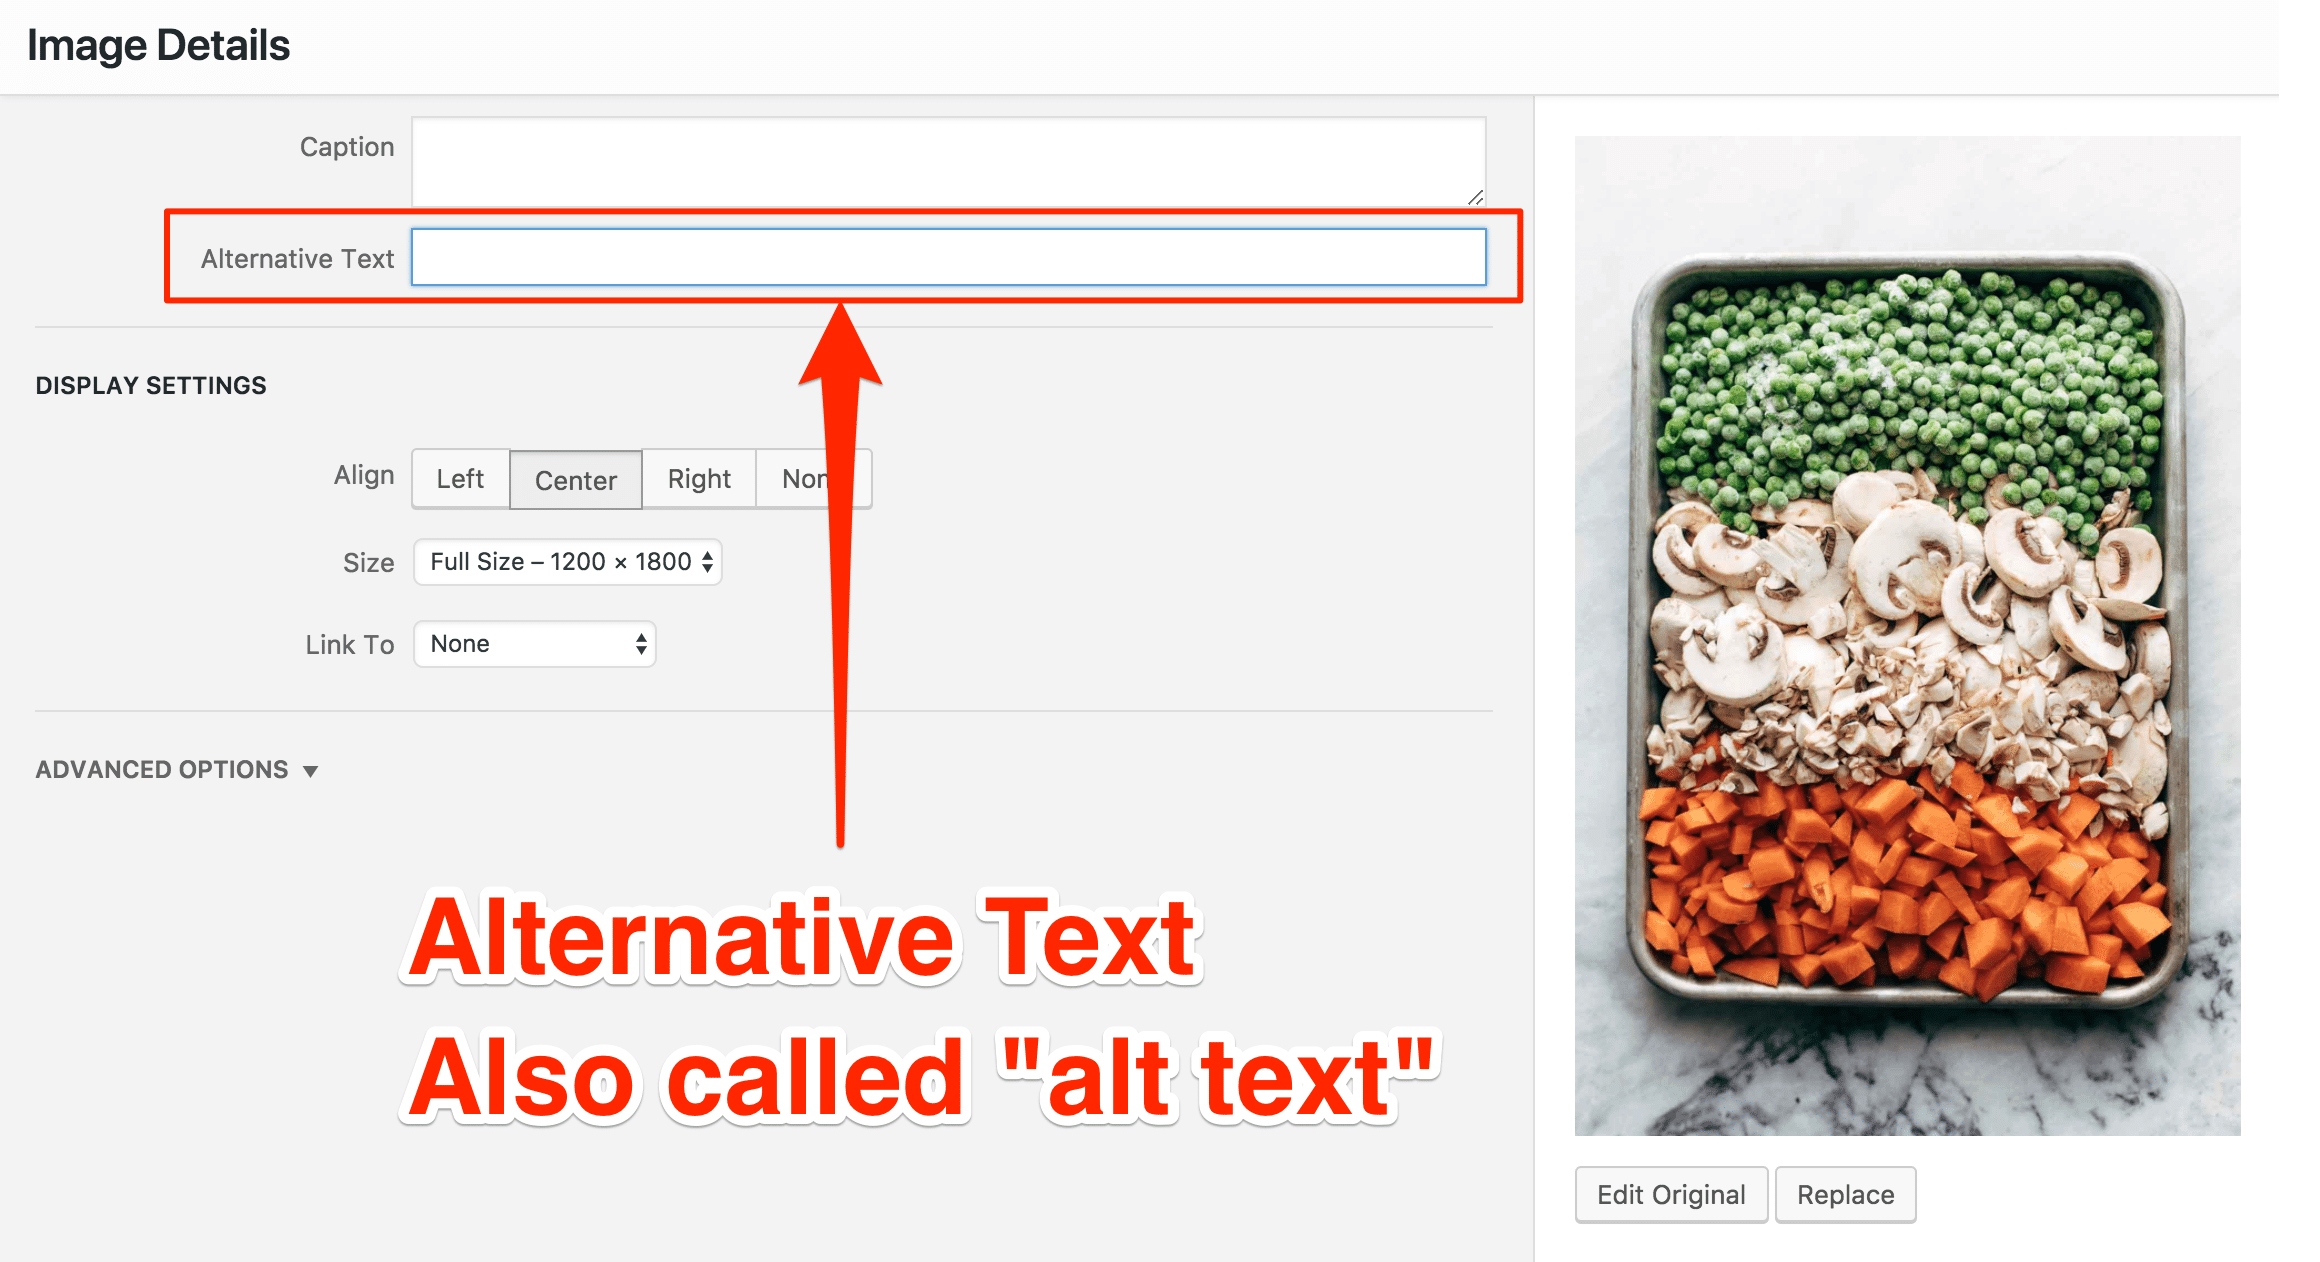 Screenshot of the Alternative Text field in the Image Details window on WordPress